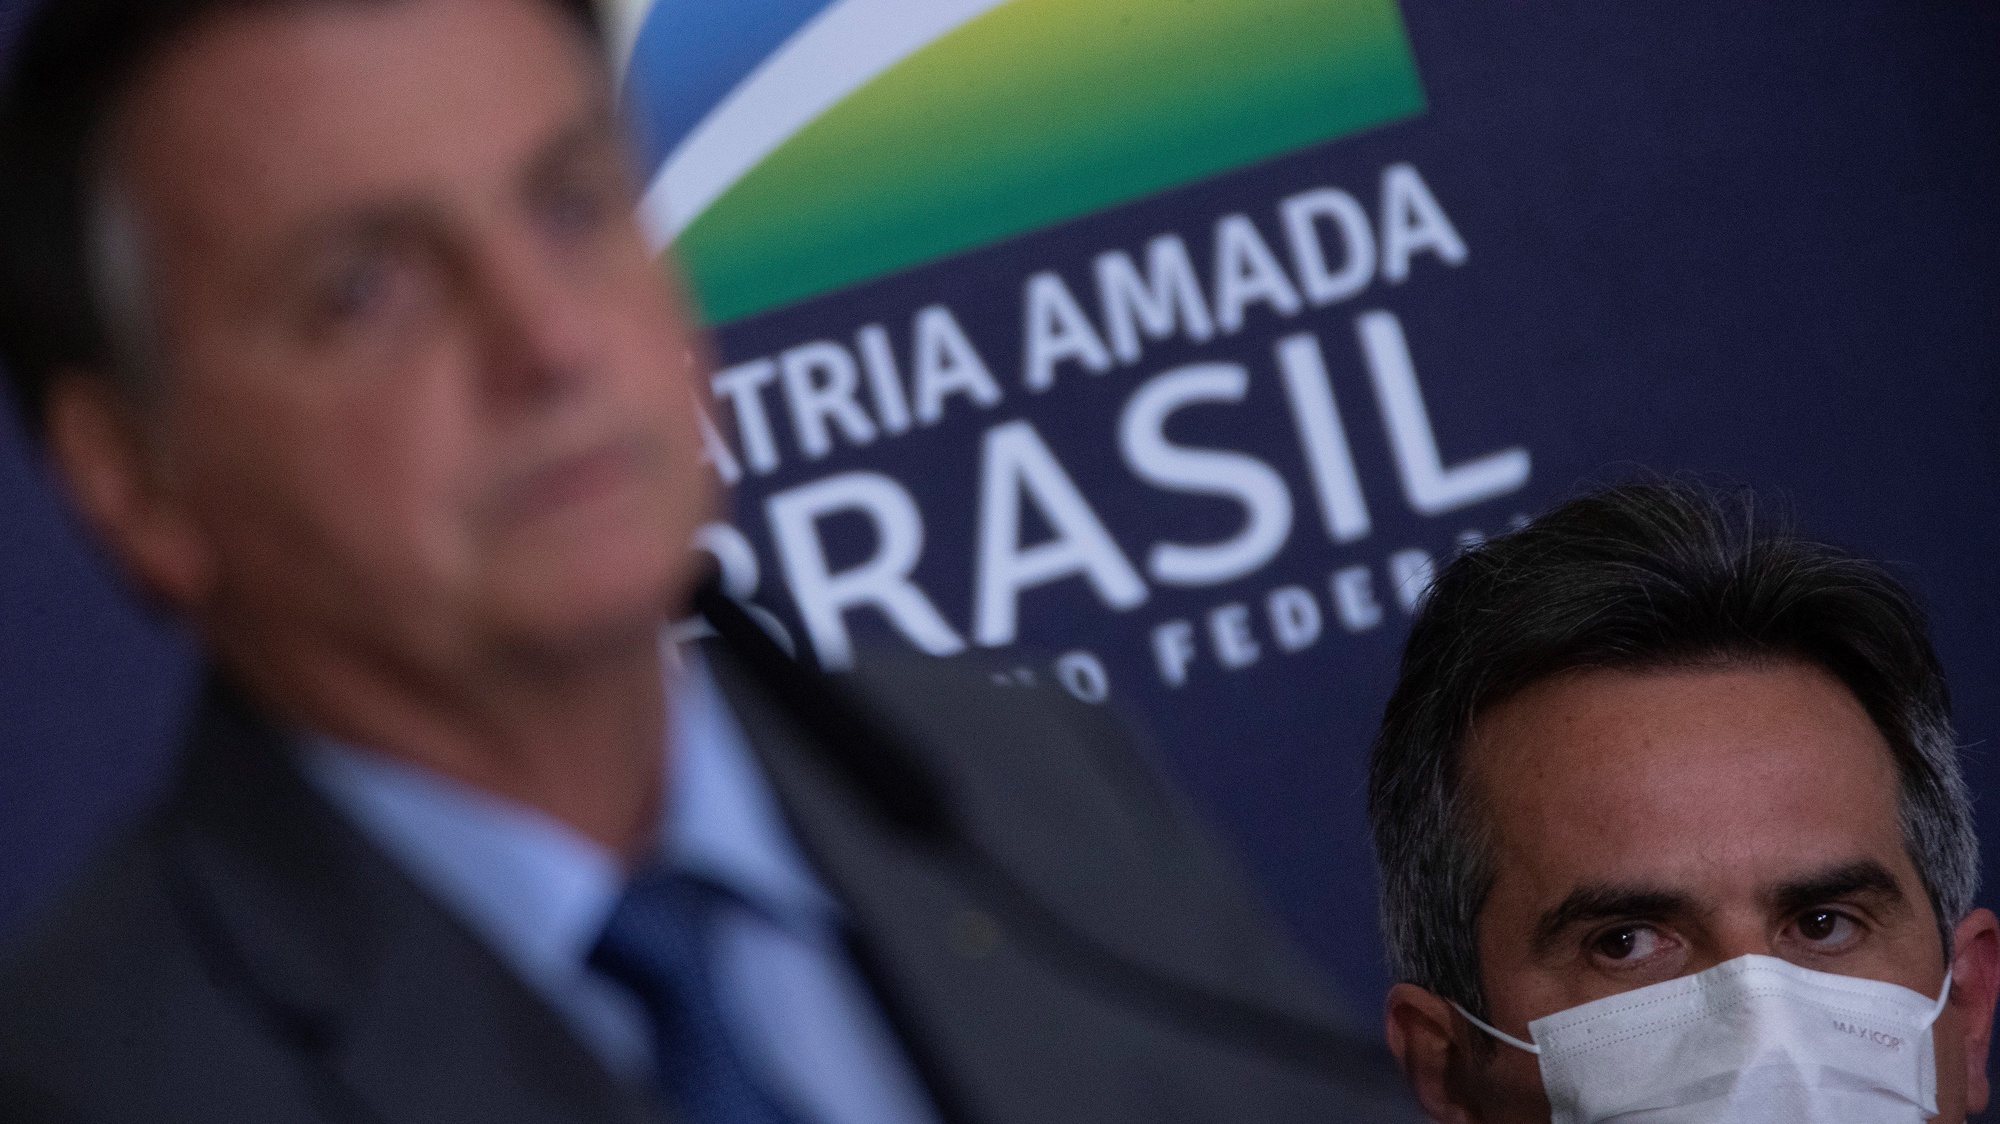 epa09371932 Senator Ciro Nogueira (R), along with the President of Brazil Jair Bolsonaro, participates in an act at the Palacio do Planalto, in Brasilia, Brazil, 27 July 2021. Bolsonaro took the first step of a new ministerial reform to cement his support in Congress and gives momentum to his controversial agenda, at a time of strong resistance due to the health and economic crisis caused by the coronavirus pandemic.  EPA/Joedson Alves